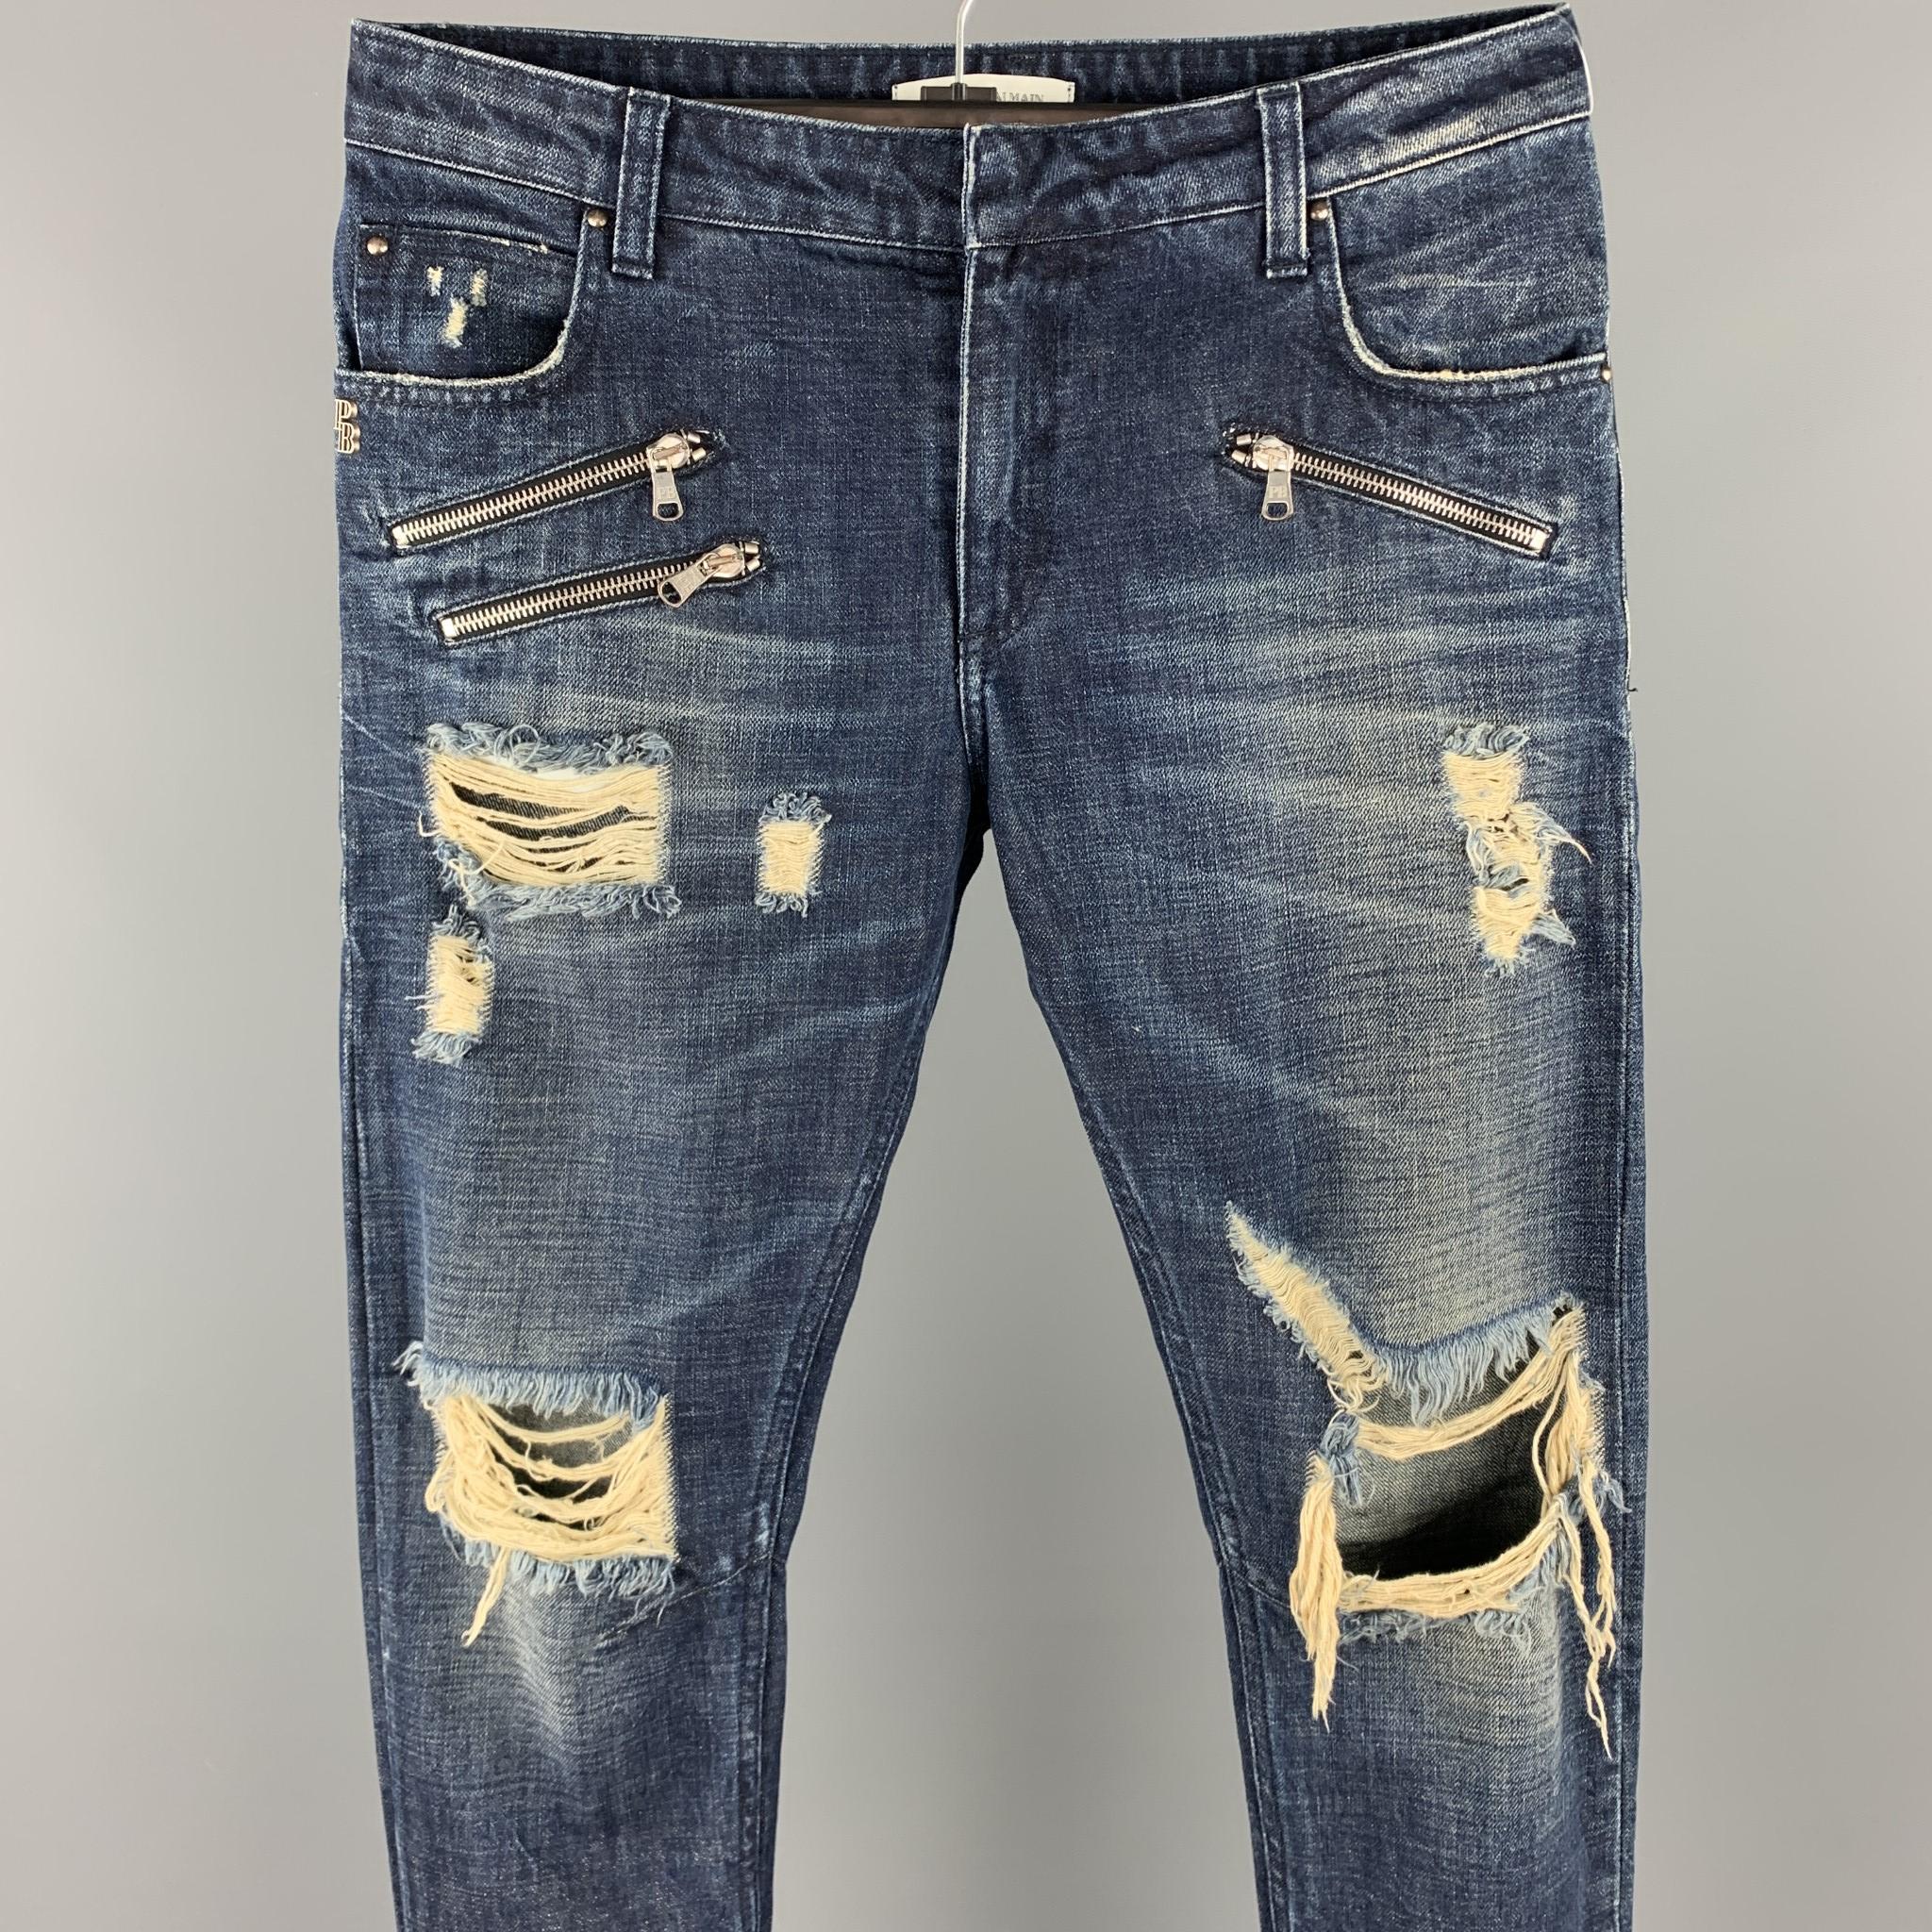 PIERRE BALMAIN jeans comes in a indigo distressed denim featuring a slim fit, zipper pocket details, and a zip fly closure. Made in Italy.

Excellent Pre-Owned Condition.
Marked: 26 40
Original Retail Price: $995.00

Measurements:

Waist: 32 in.